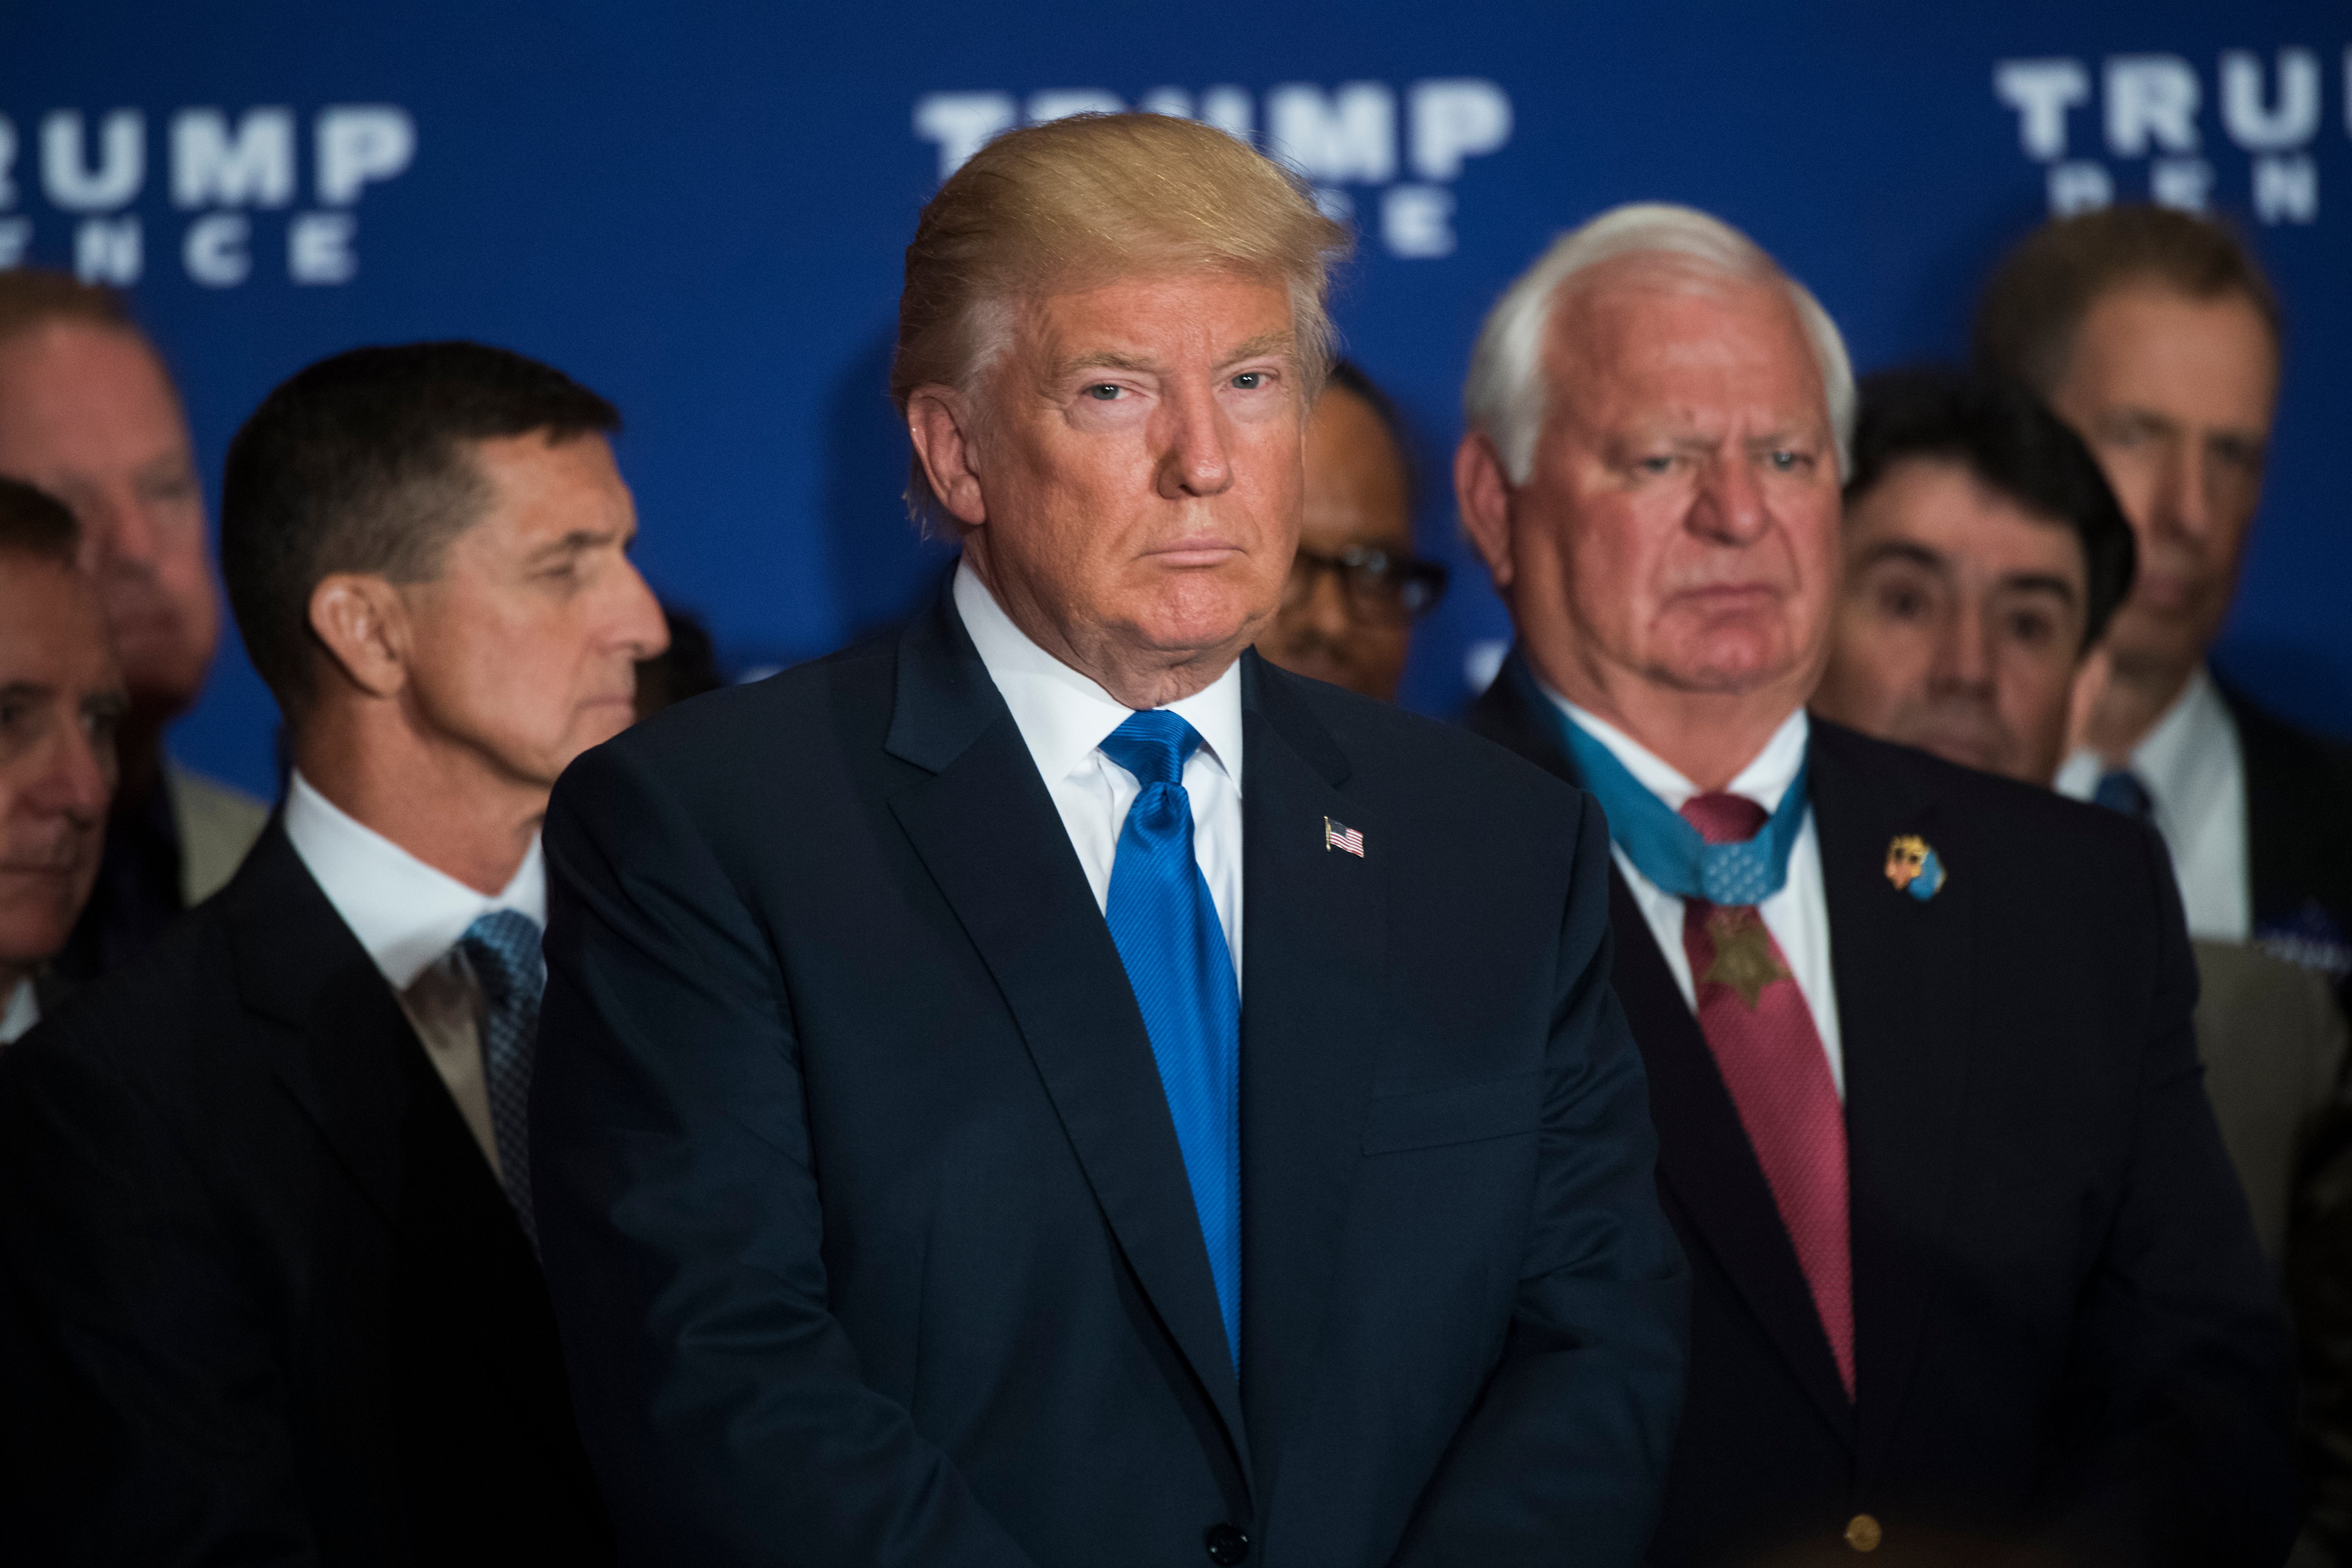 Republican presidential candidate Donald Trump attends a campaign event with veterans at the Trump International Hotel on Pennsylvania Ave., NW, on Sept. 16, 2016. (Tom Williams—CQ-Roll Call,Inc./Getty Images)